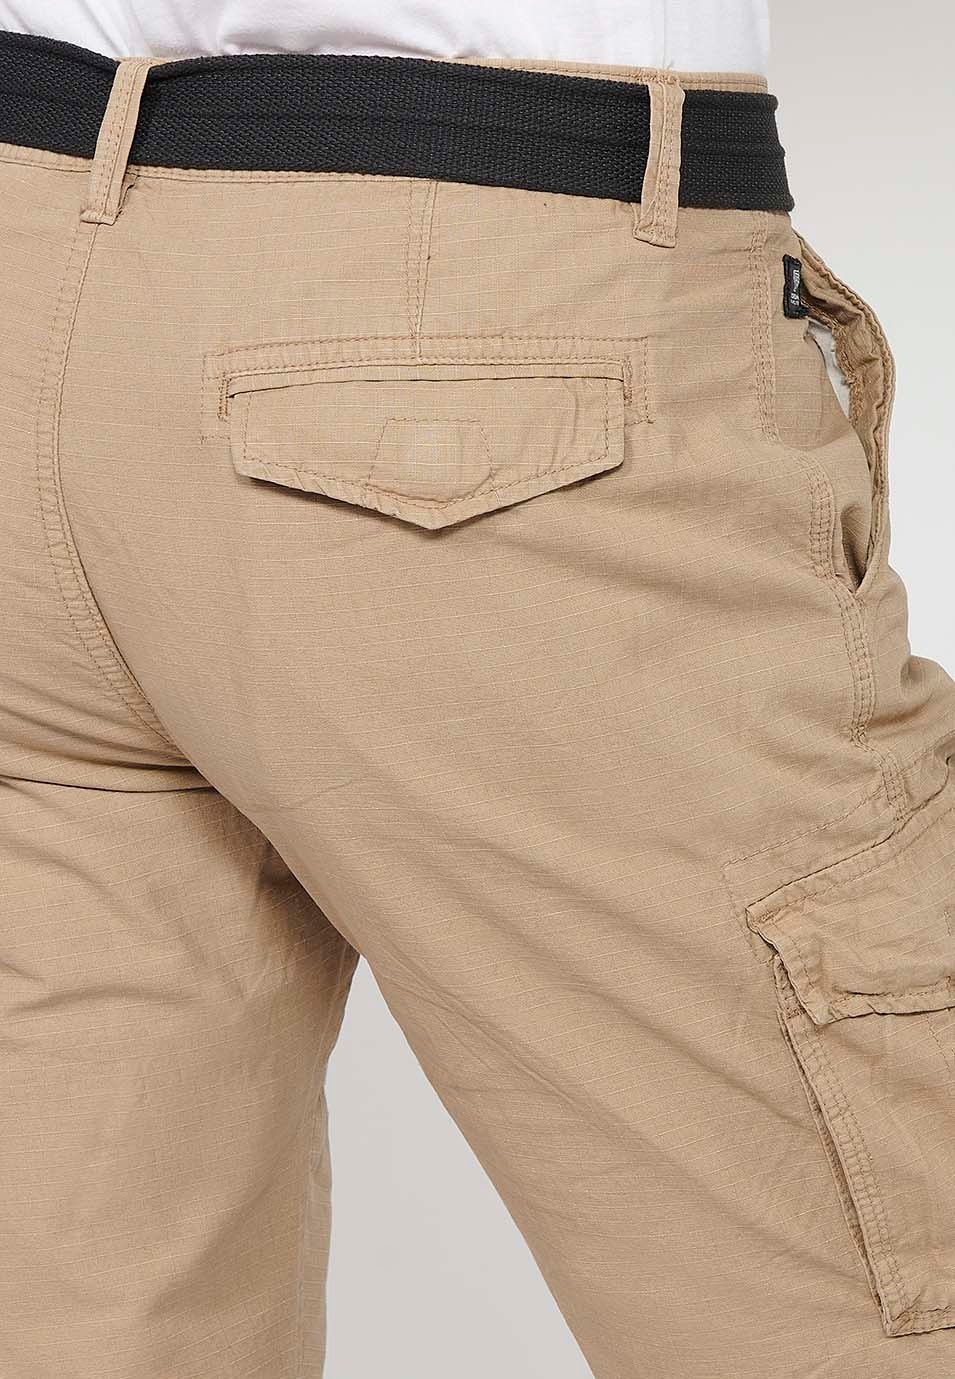 Cotton cargo shorts with belt and front closure with zipper and button with pockets, two back pockets with flap and two cargo pants in Beige Color for Men 8